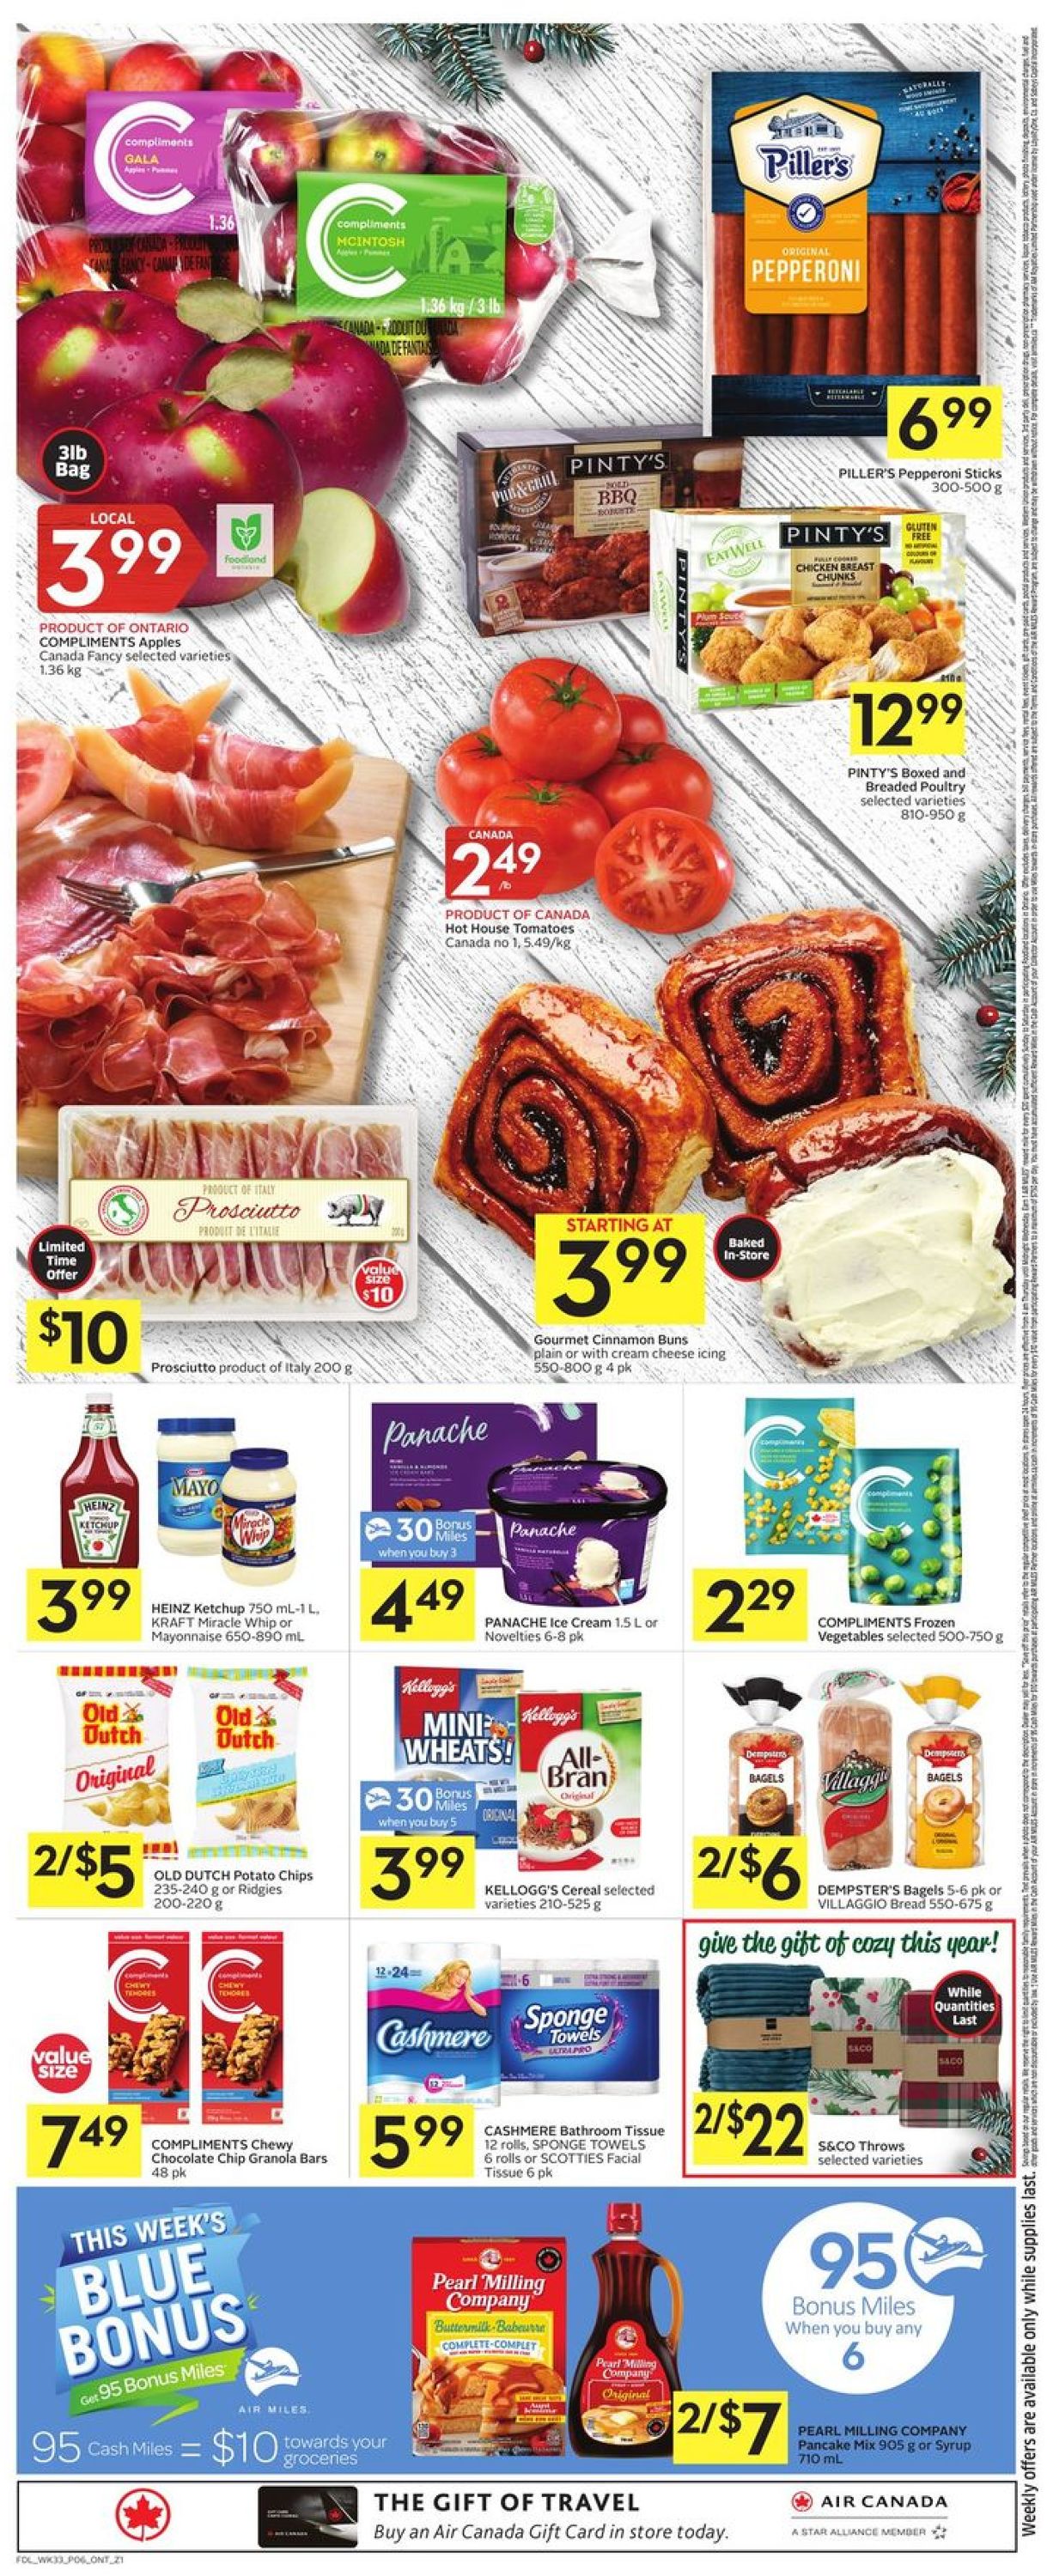 Foodland Flyer from 12/09/2021